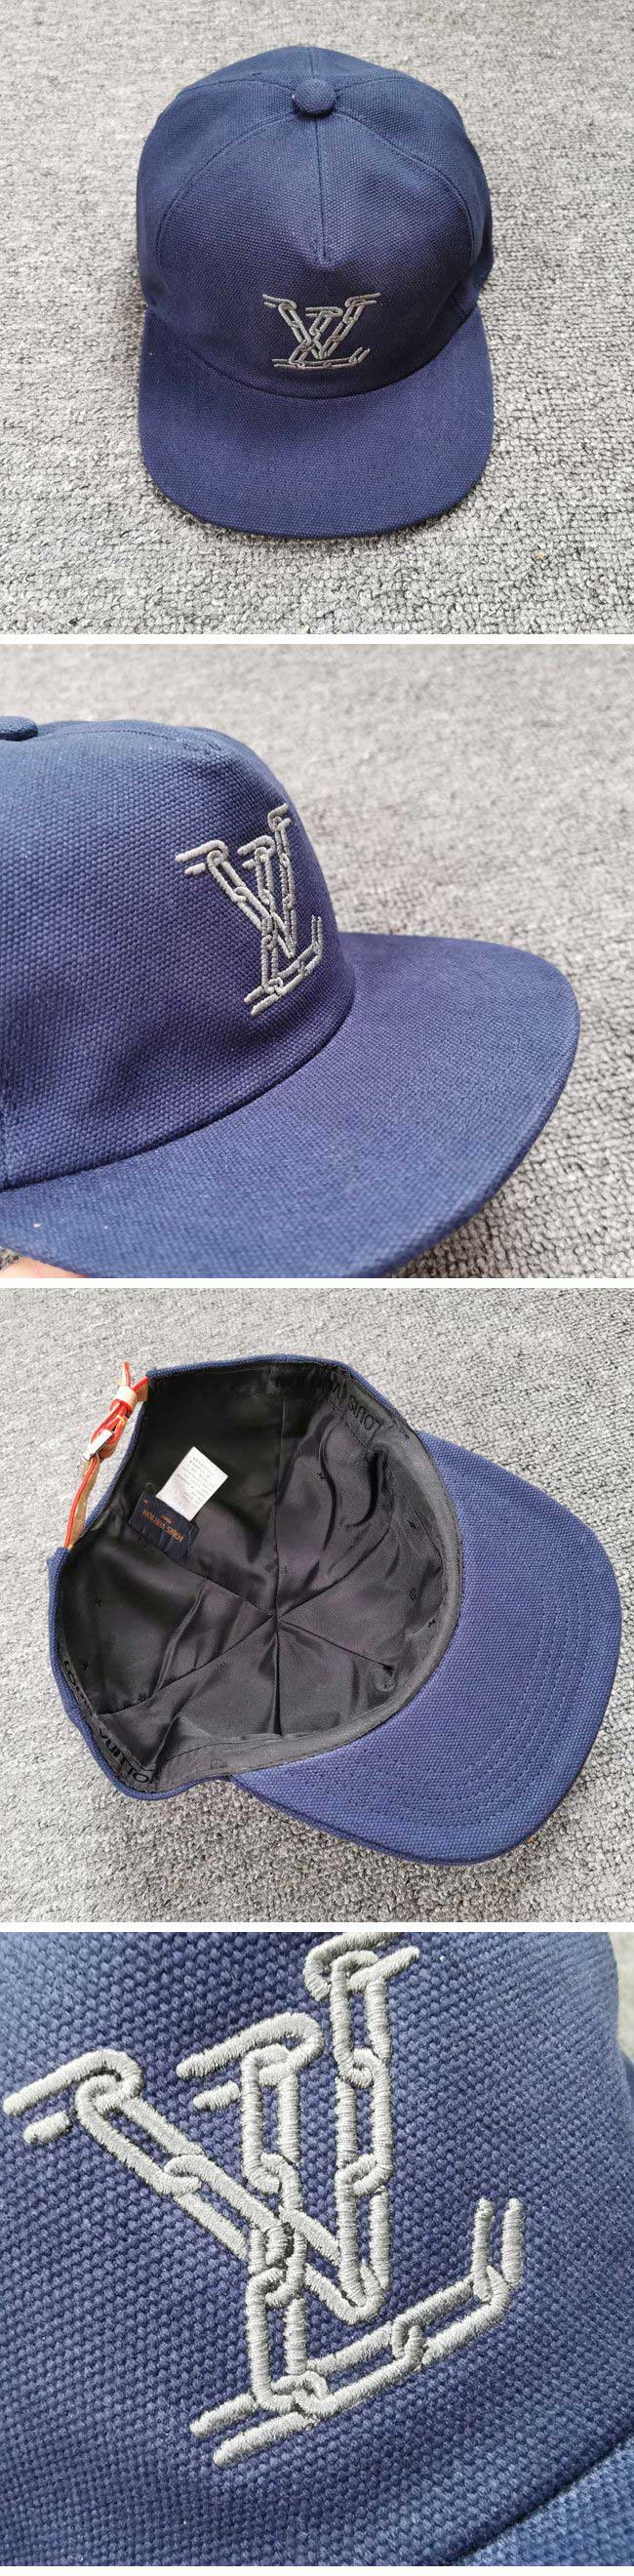 Louis Vuitto Lv Chain Cap ルイヴィトン Lv チェーン キャップ